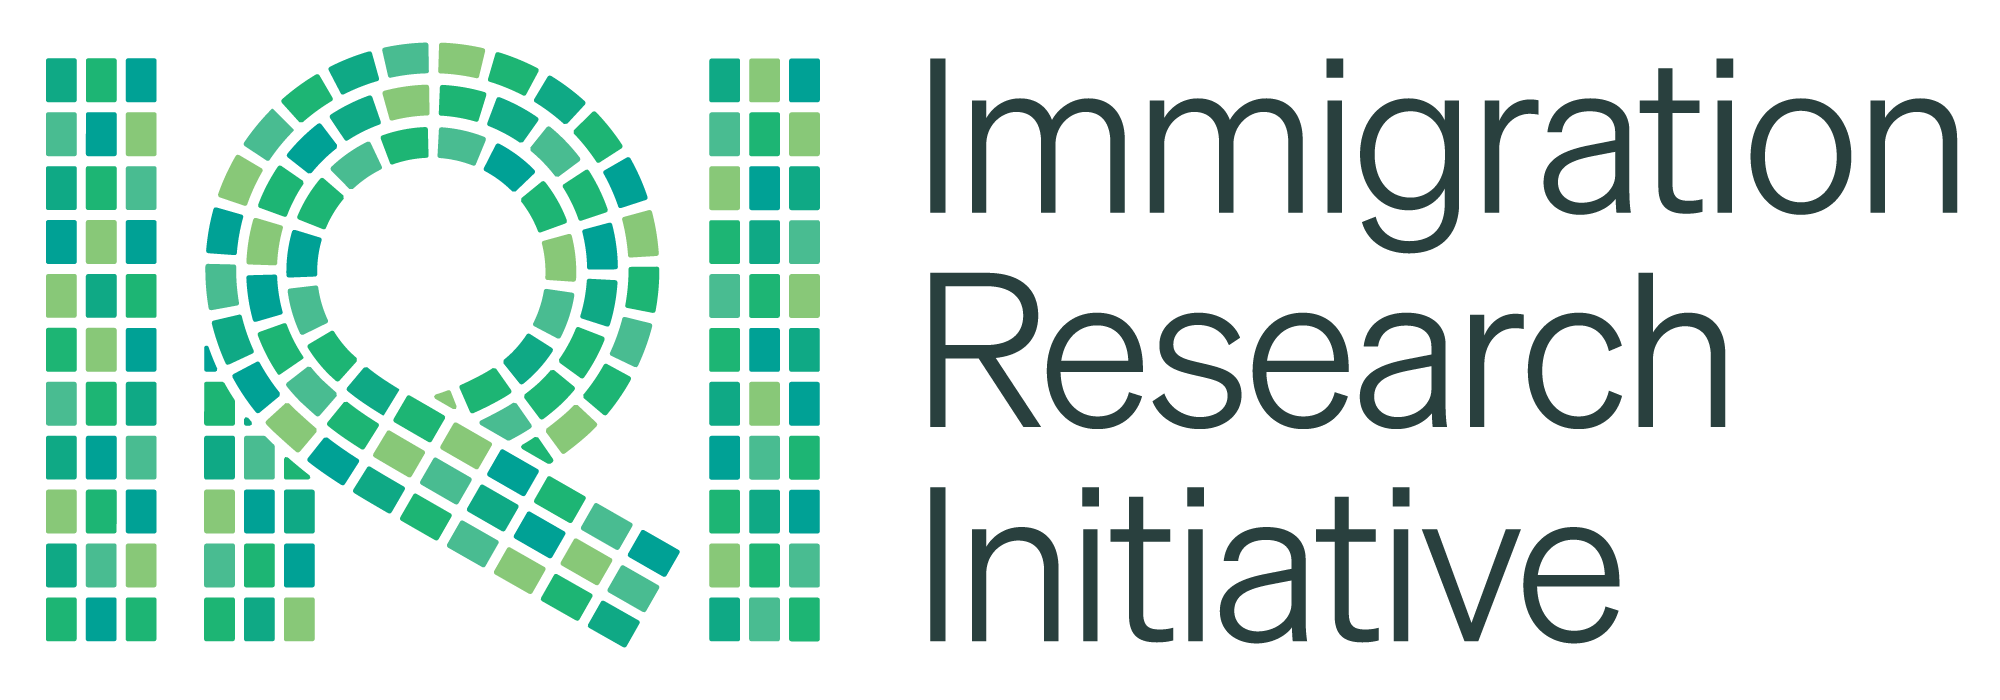 Immigration Research Initiative